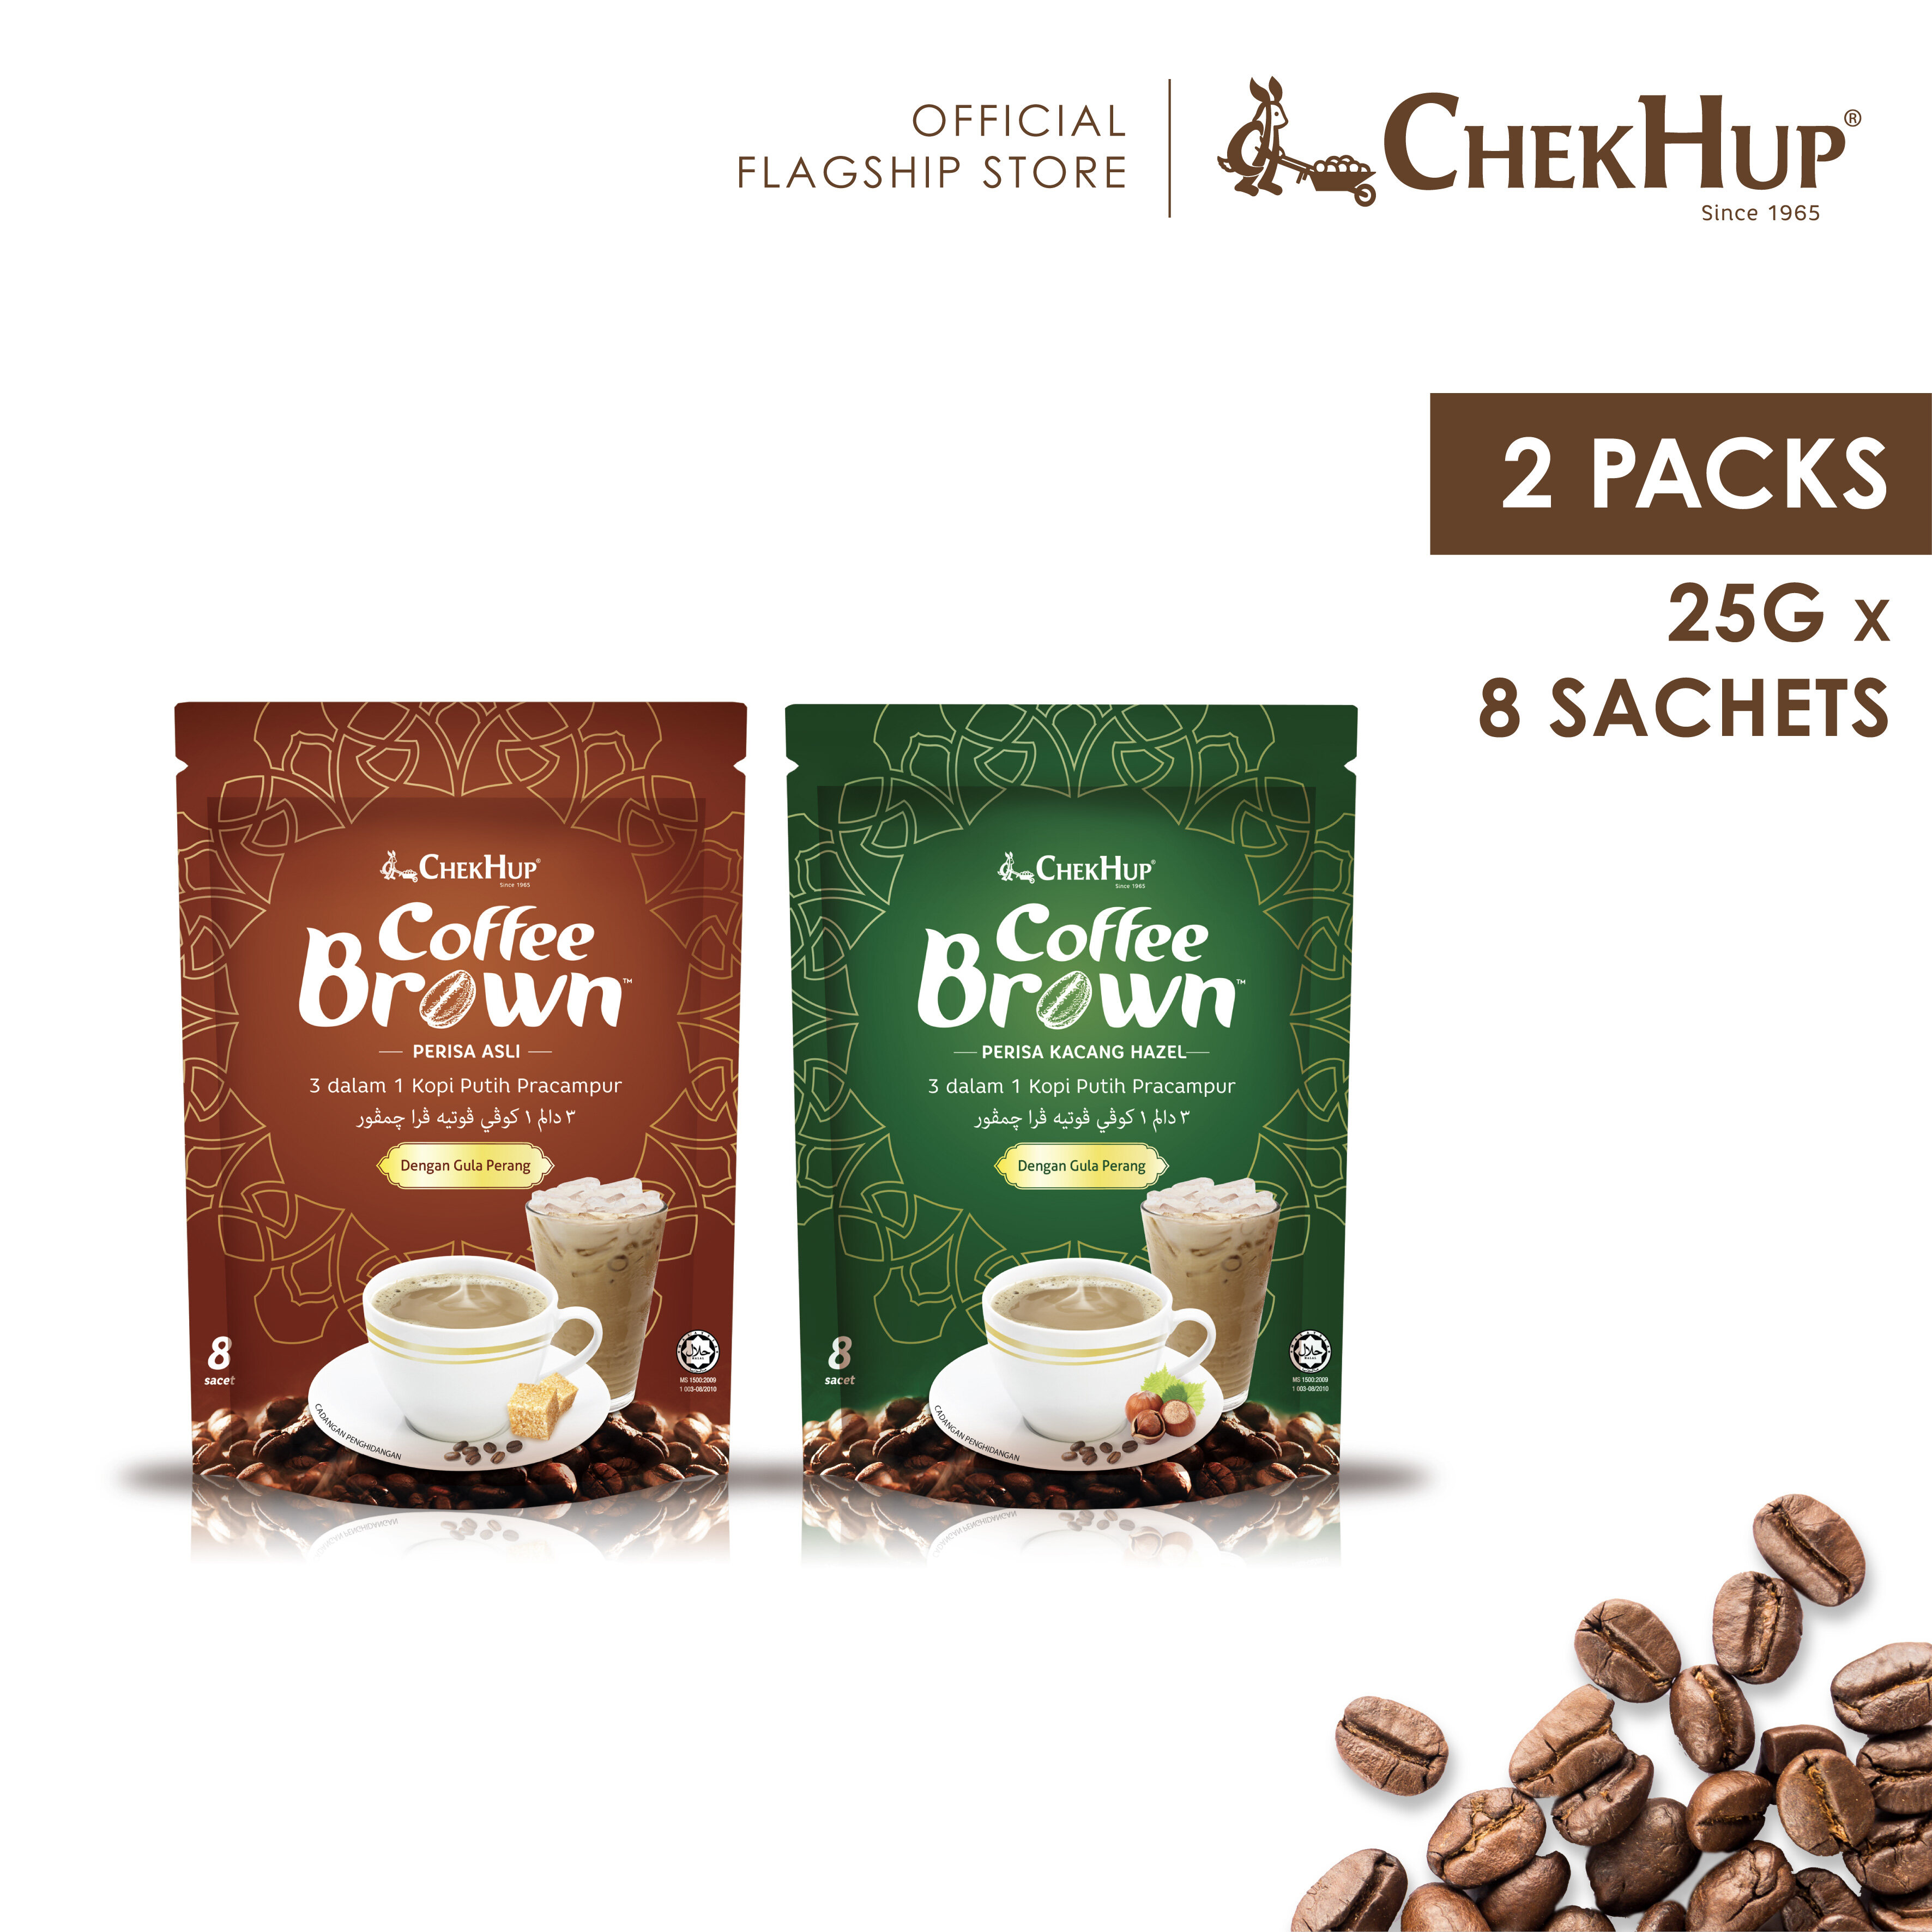 Chek Hup Coffee Brown 25g x 8s (Combo Pack of 2 Packets)